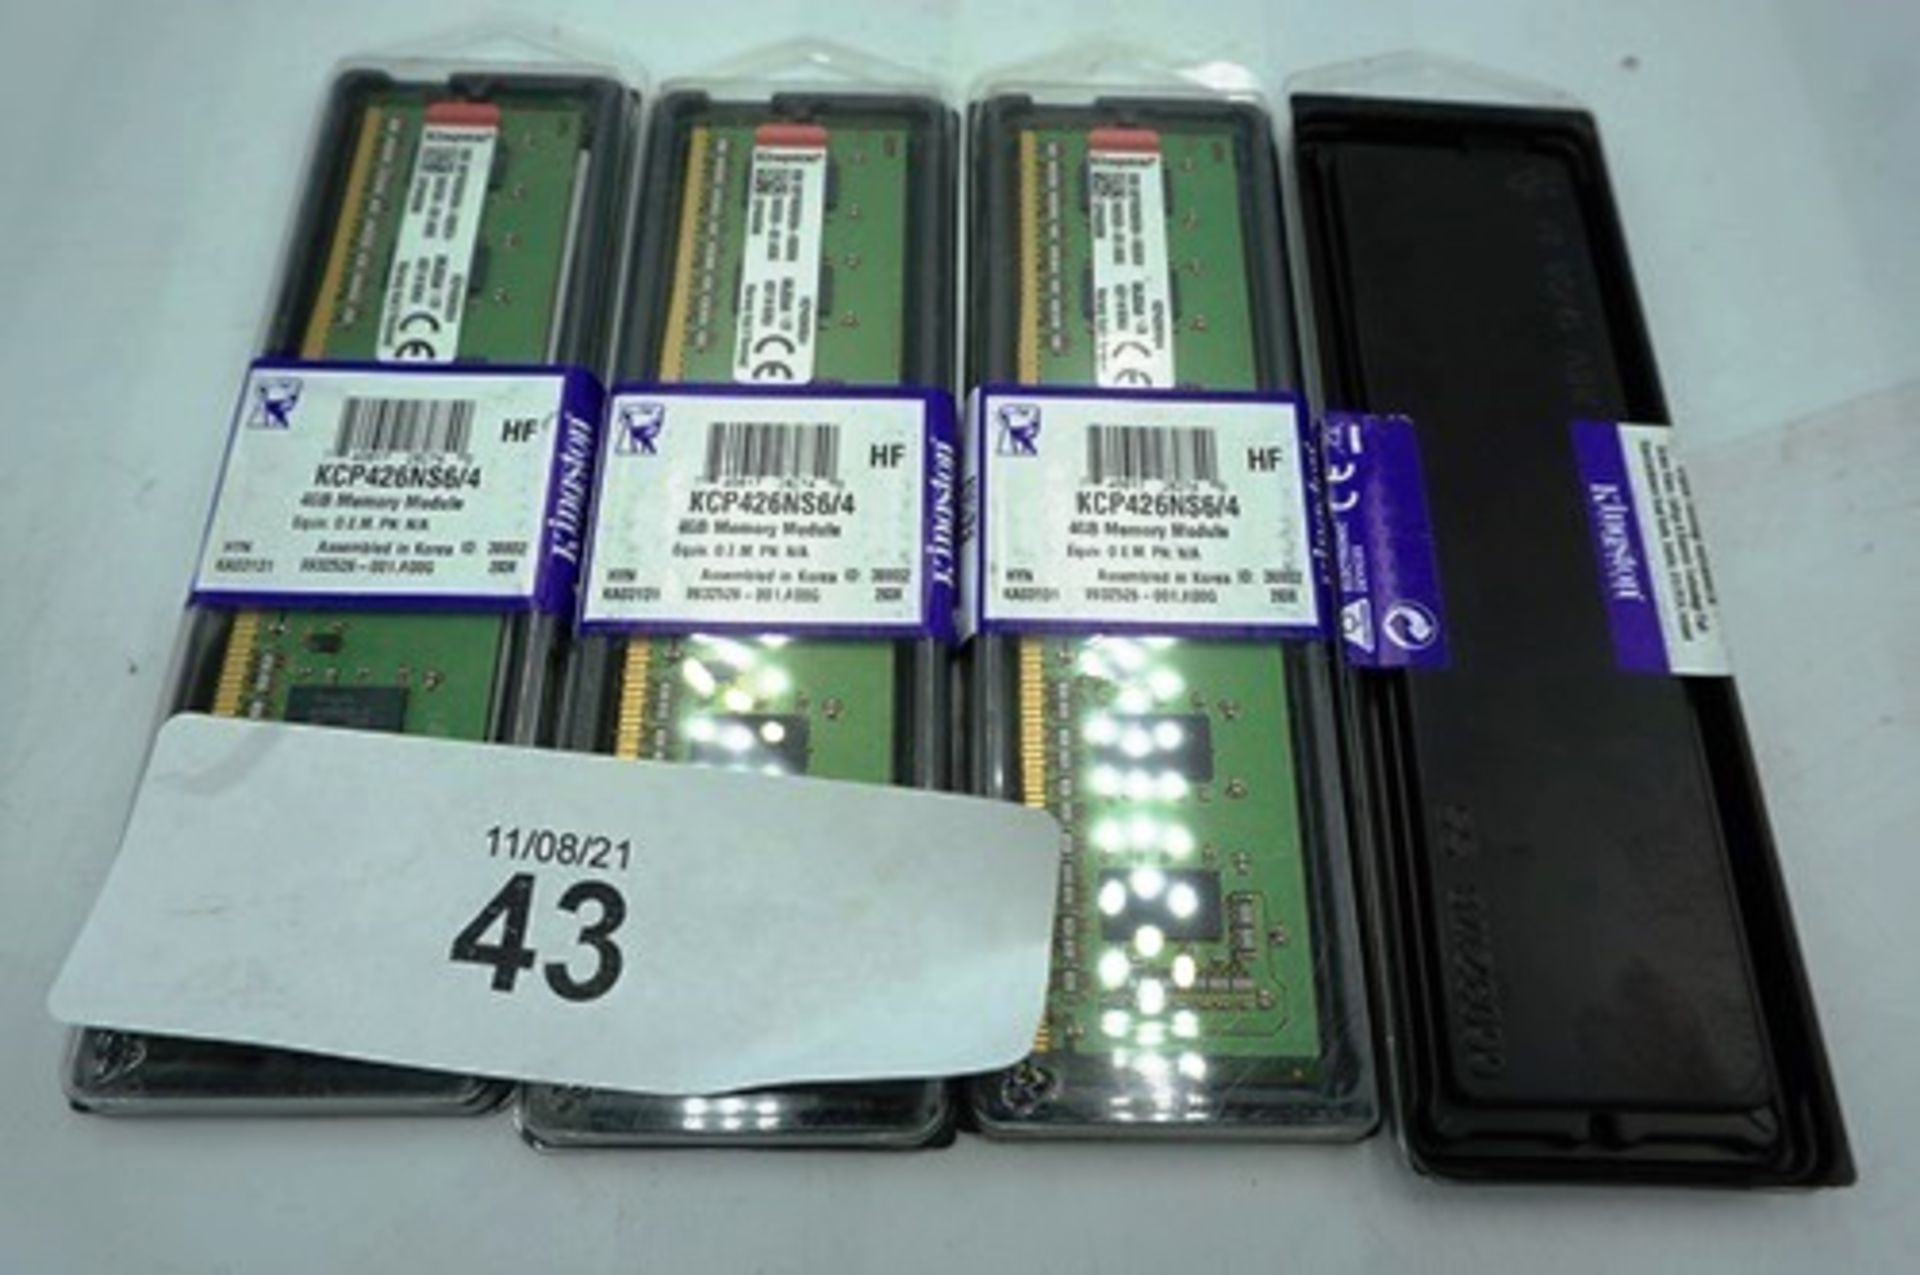 4 x Kingston 4gb memory modules, model KCP426NS6/4 - Sealed new in pack (C1) - Image 2 of 2